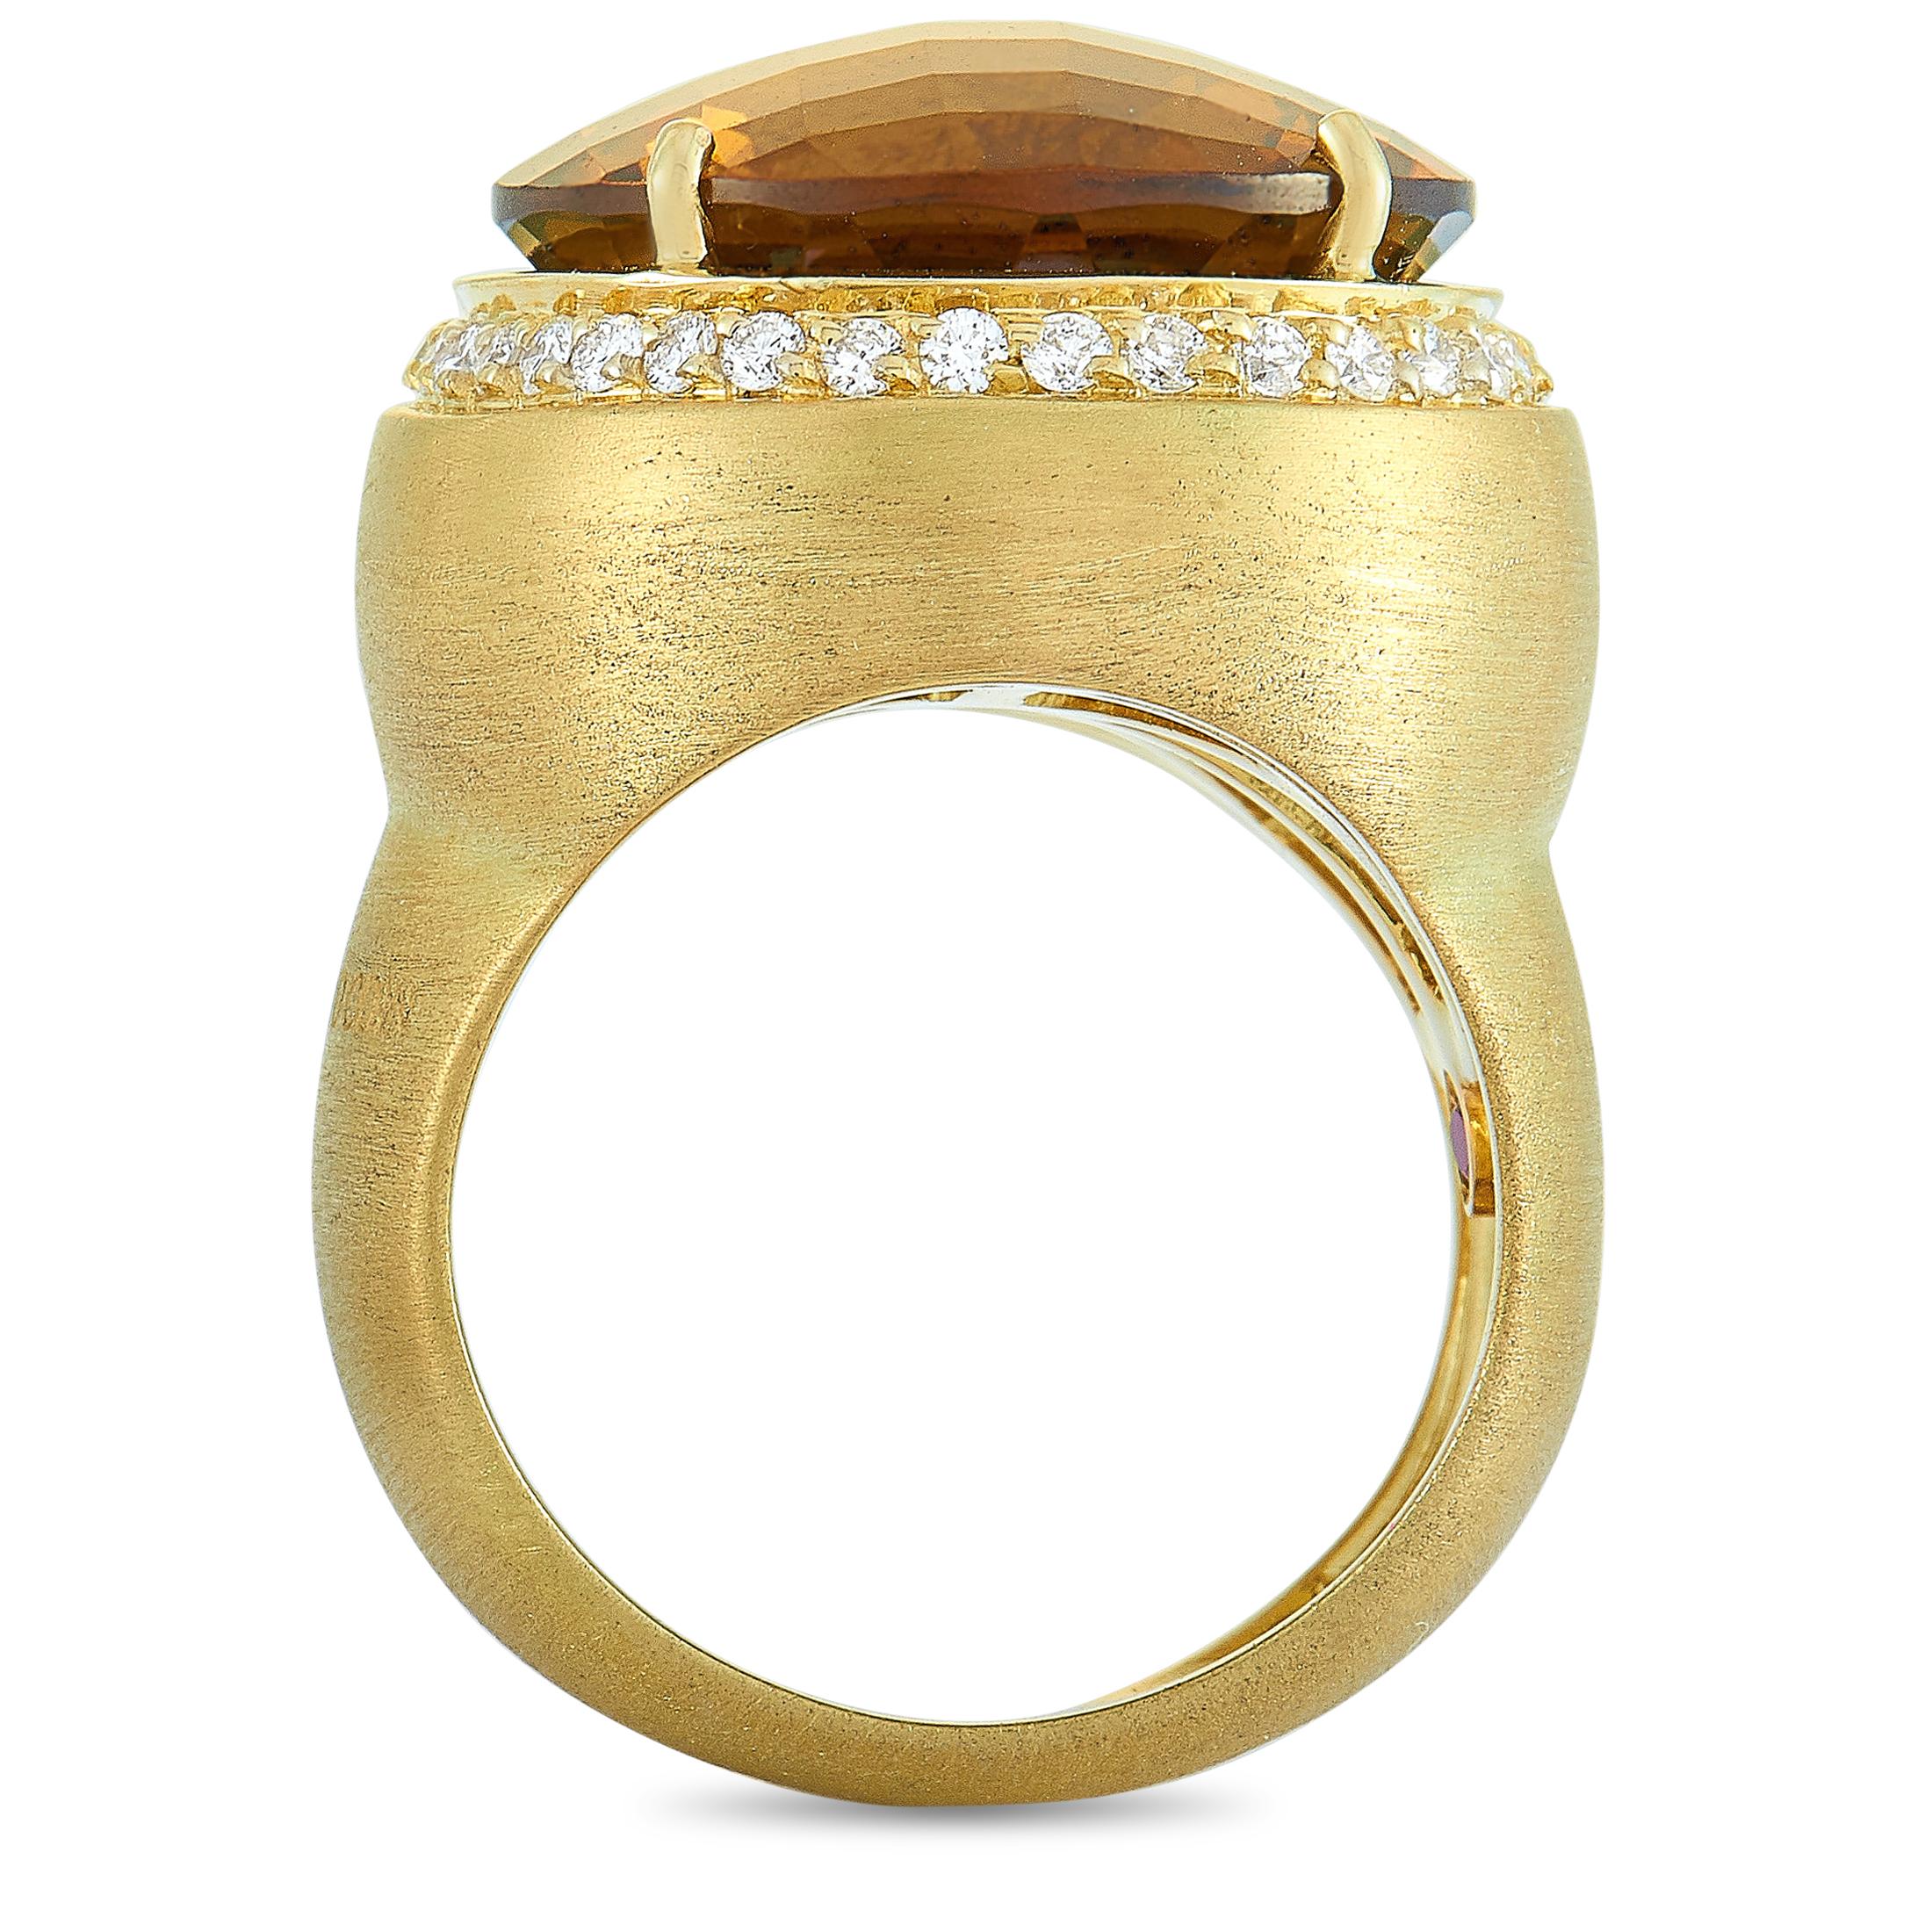 This Roberto Coin ring is crafted from 18K yellow gold and set with a honey quartz and a total of 0.40 carats of diamonds. The ring weighs 15.7 grams, boasting band thickness of 6 mm and top height of 11 mm, while top dimensions measure 18 by 18